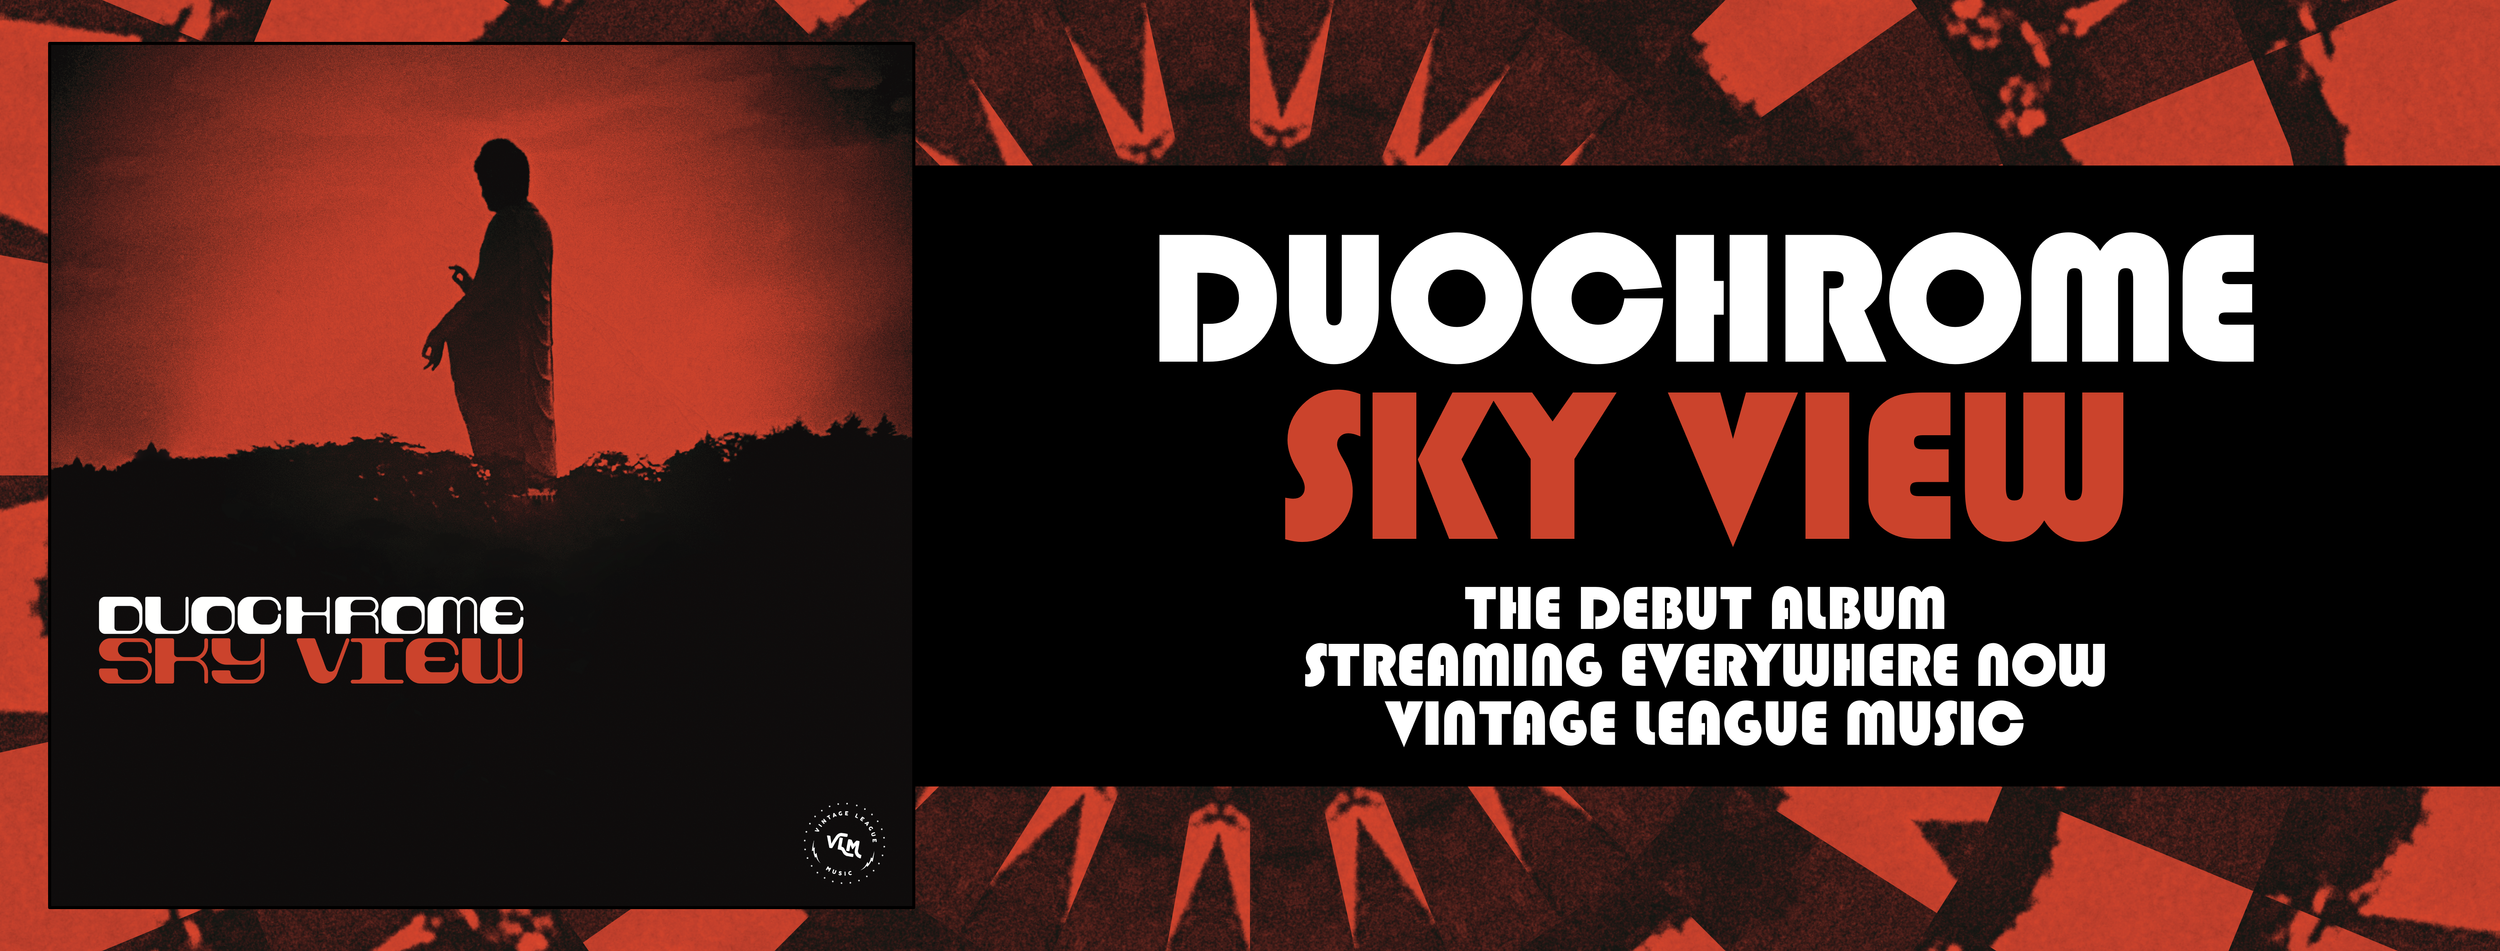 Duochrome - Sky View - album Banner@3x.png